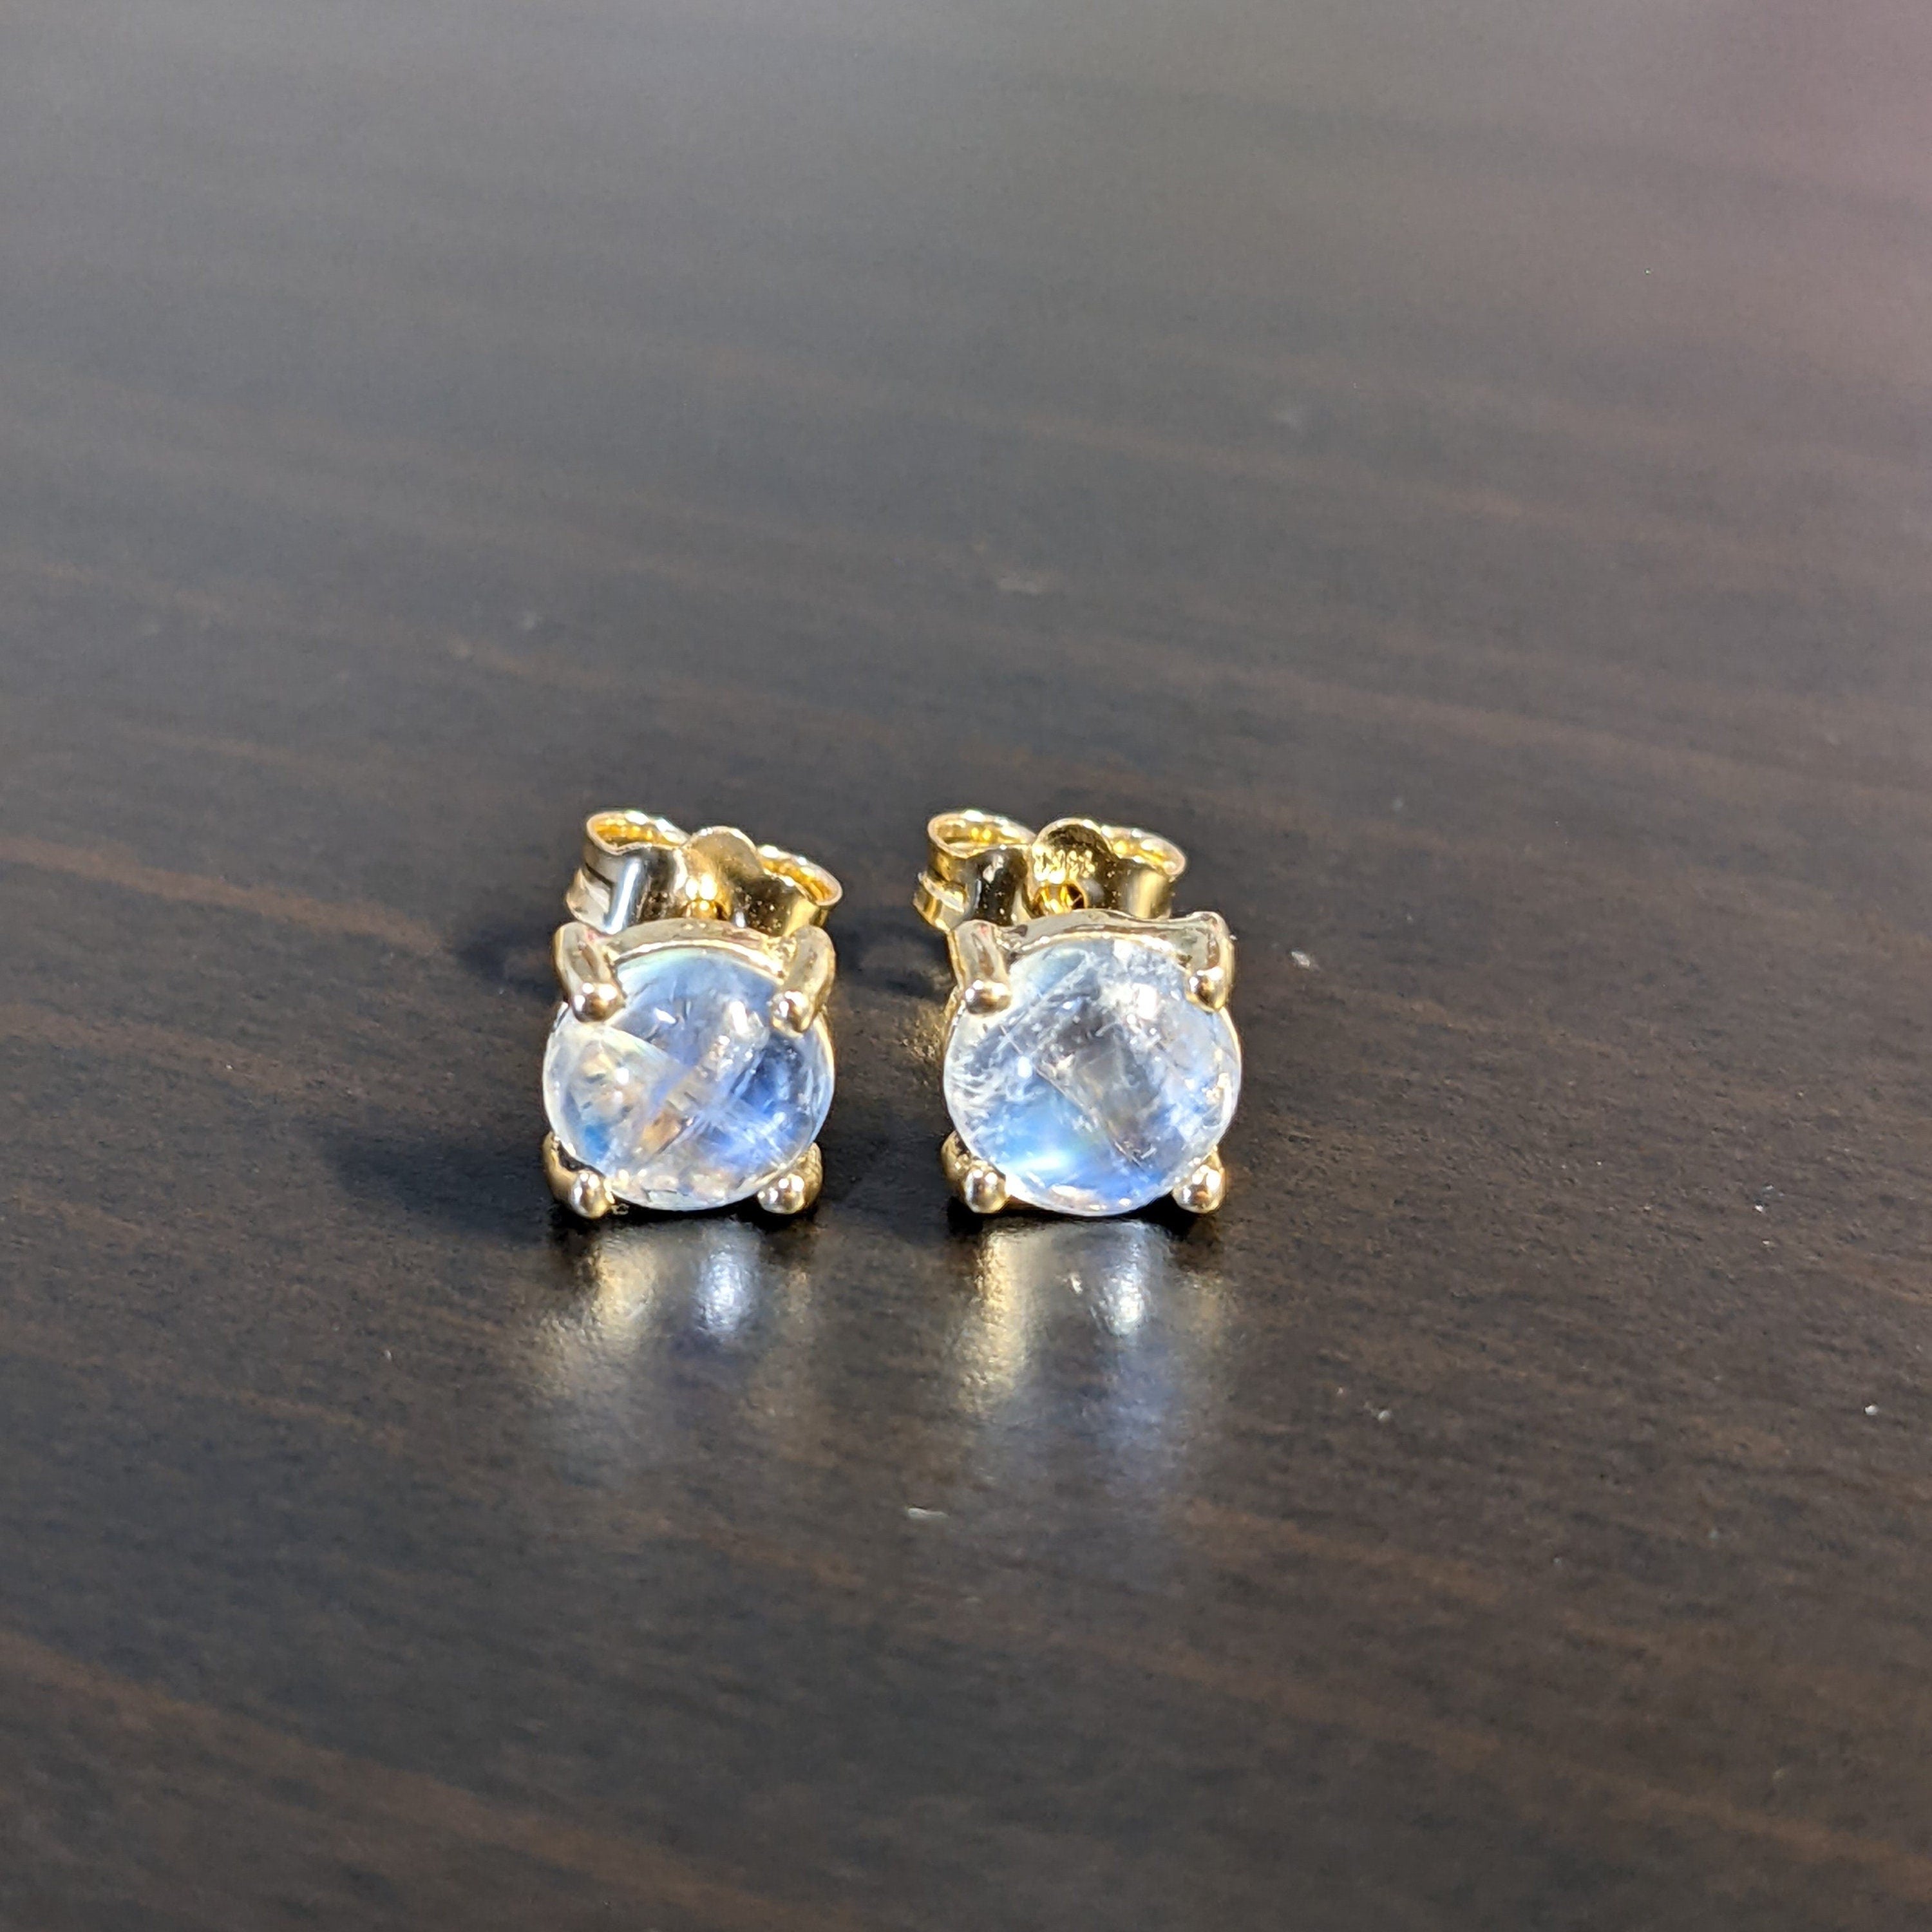 Glowing Rainbow Moonstone Stud Earrings in 14K Solid Gold | Round 5mm 6mm | 4 prong | Push Back | Wedding Birthday | Customizable